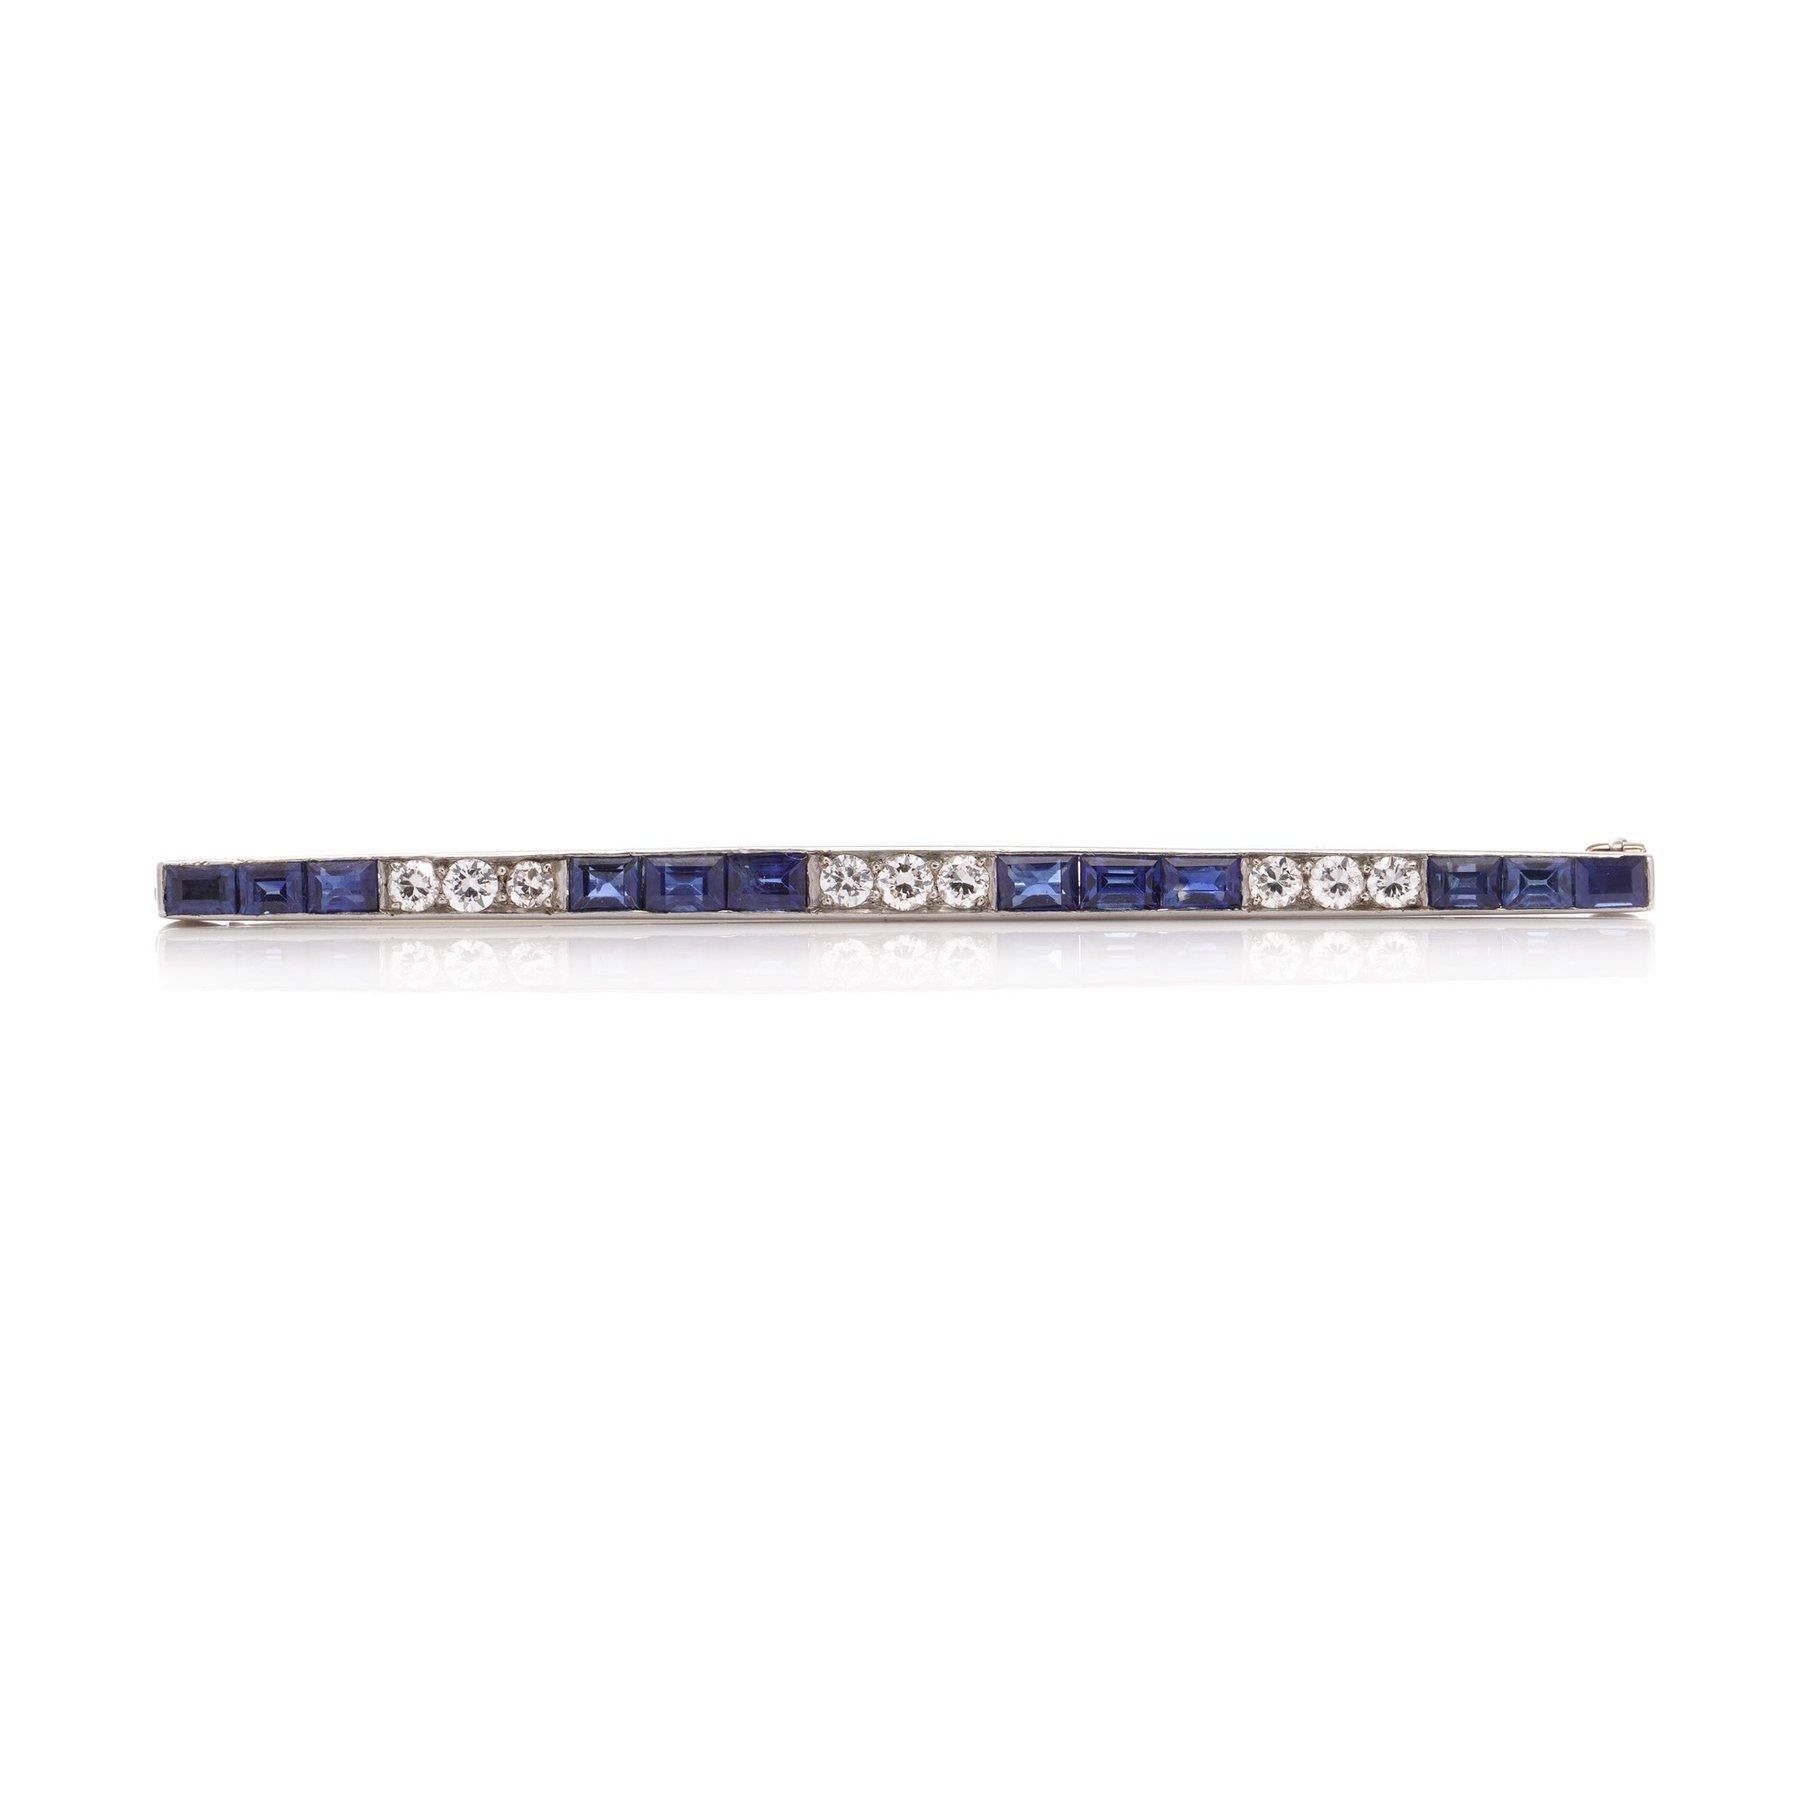 Vintage Platinum bar brooch set with calibre cut sapphires and round brilliant diamonds.
Made in Circa 1940's
X - ray tested positive for platinum. 

Dimensions: 
Length x width: 6.4 x 0.3 cm 
Weight: 5 grams 

Diamonds -
Cut: round